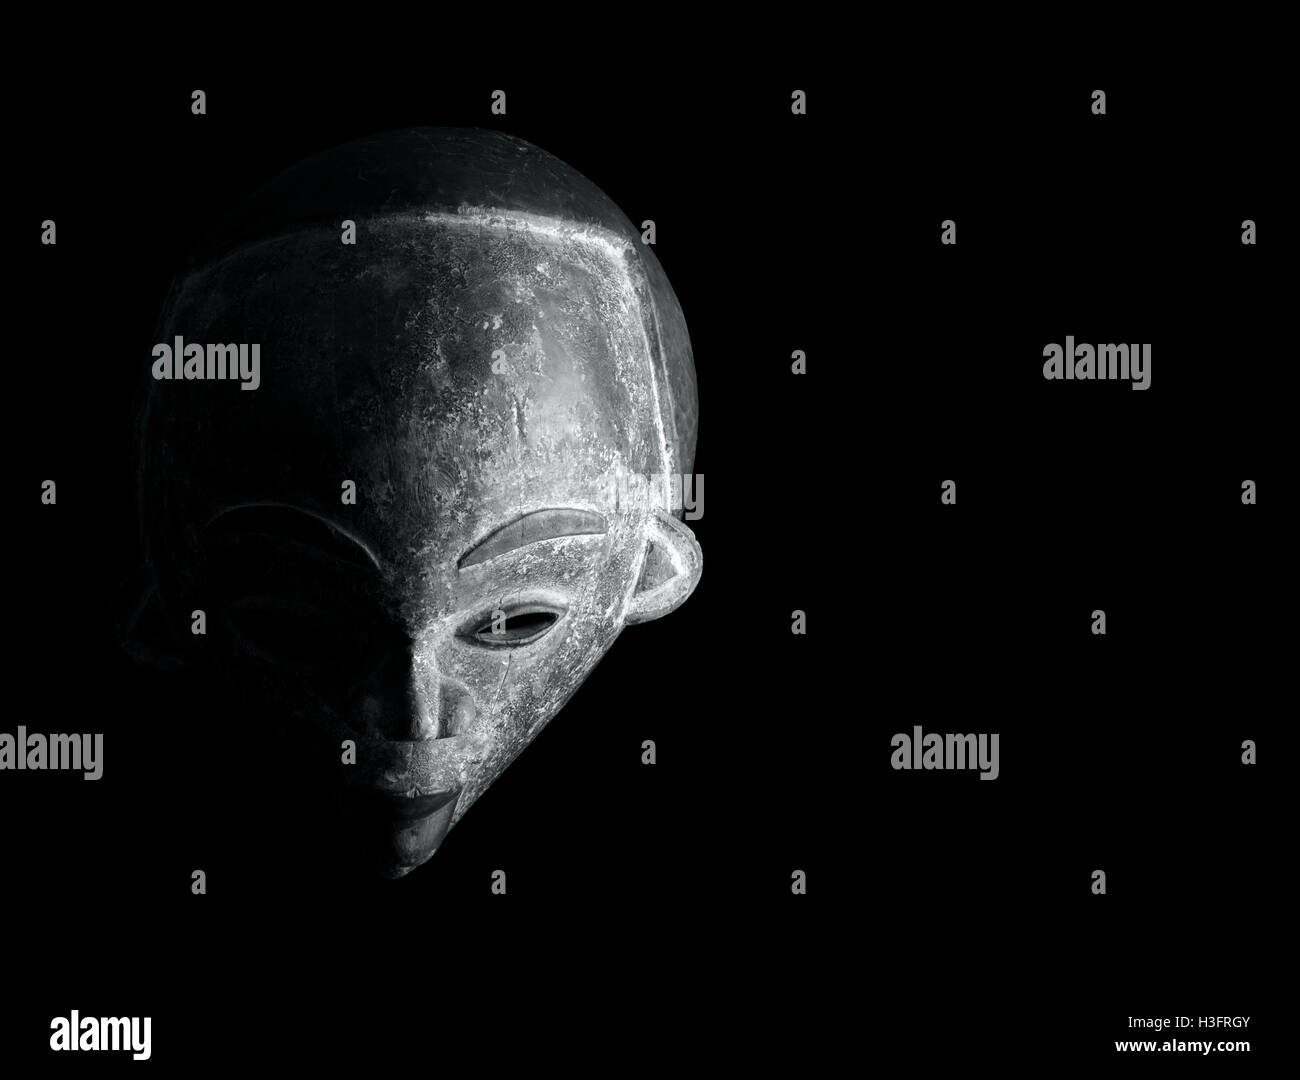 African culture, carved mask on a black background Stock Photo